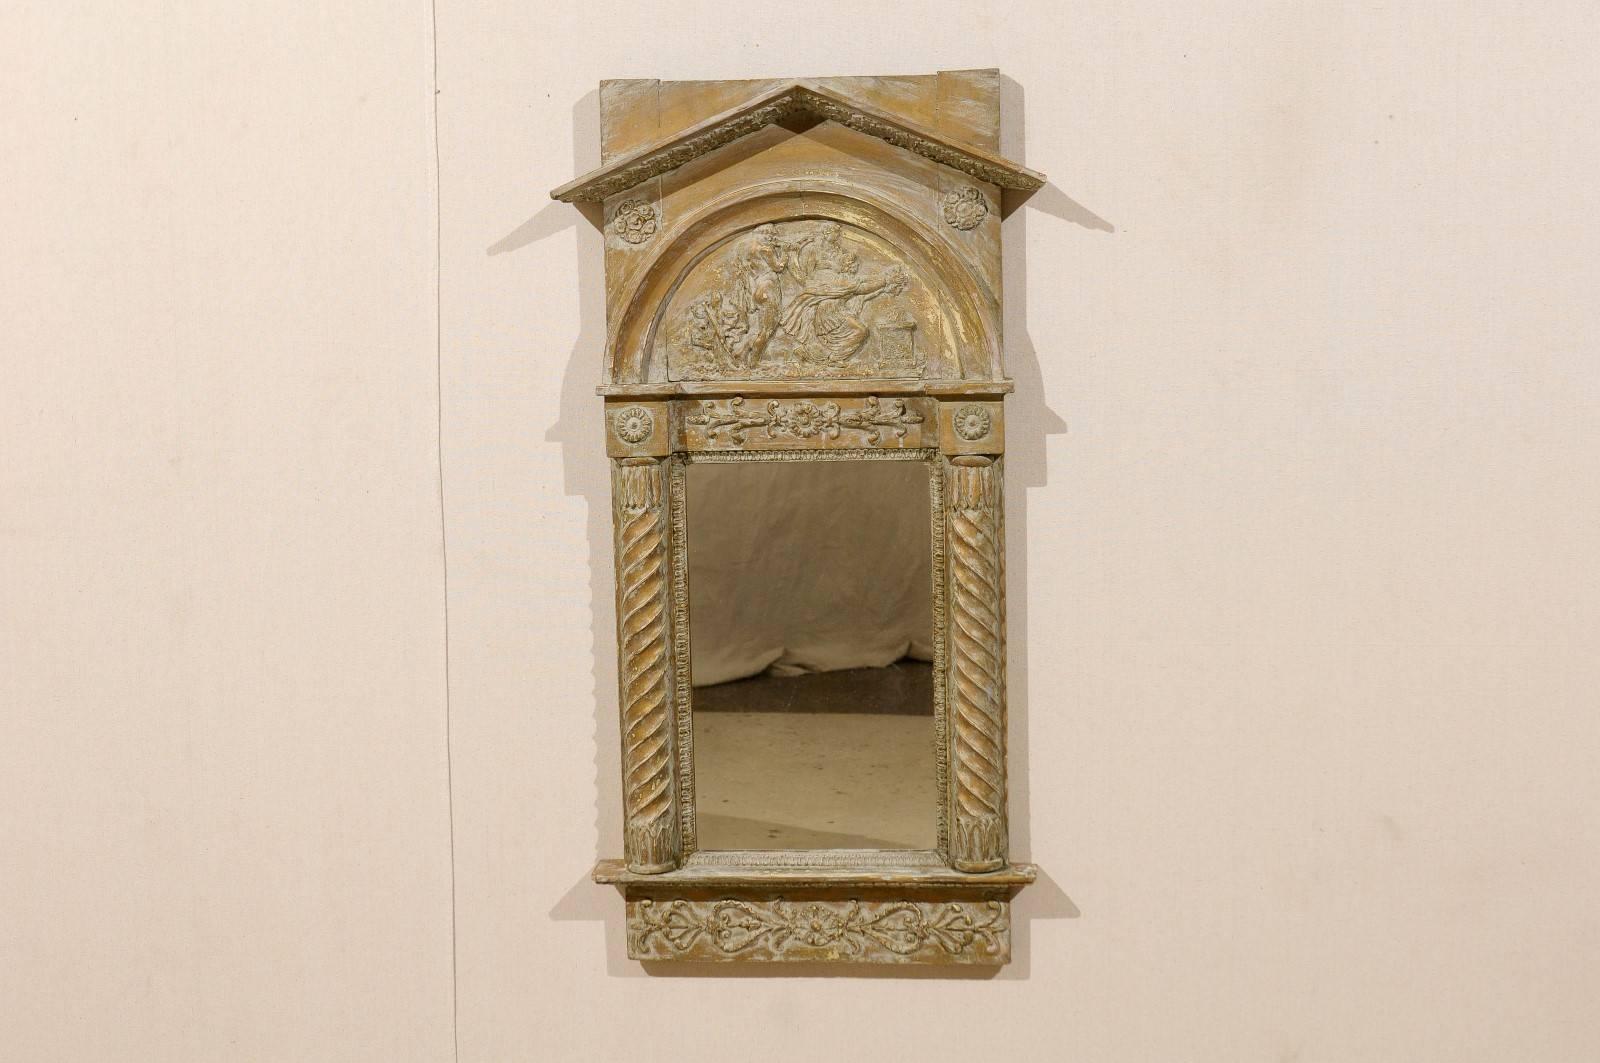 A Swedish wood carved mirror, circa 1820. This neoclassical Swedish mirror features a triangular molding at the crest, reminiscent of the triangular pediment of a Greco-Roman temple, under which the mythological characters carved in low-relief take